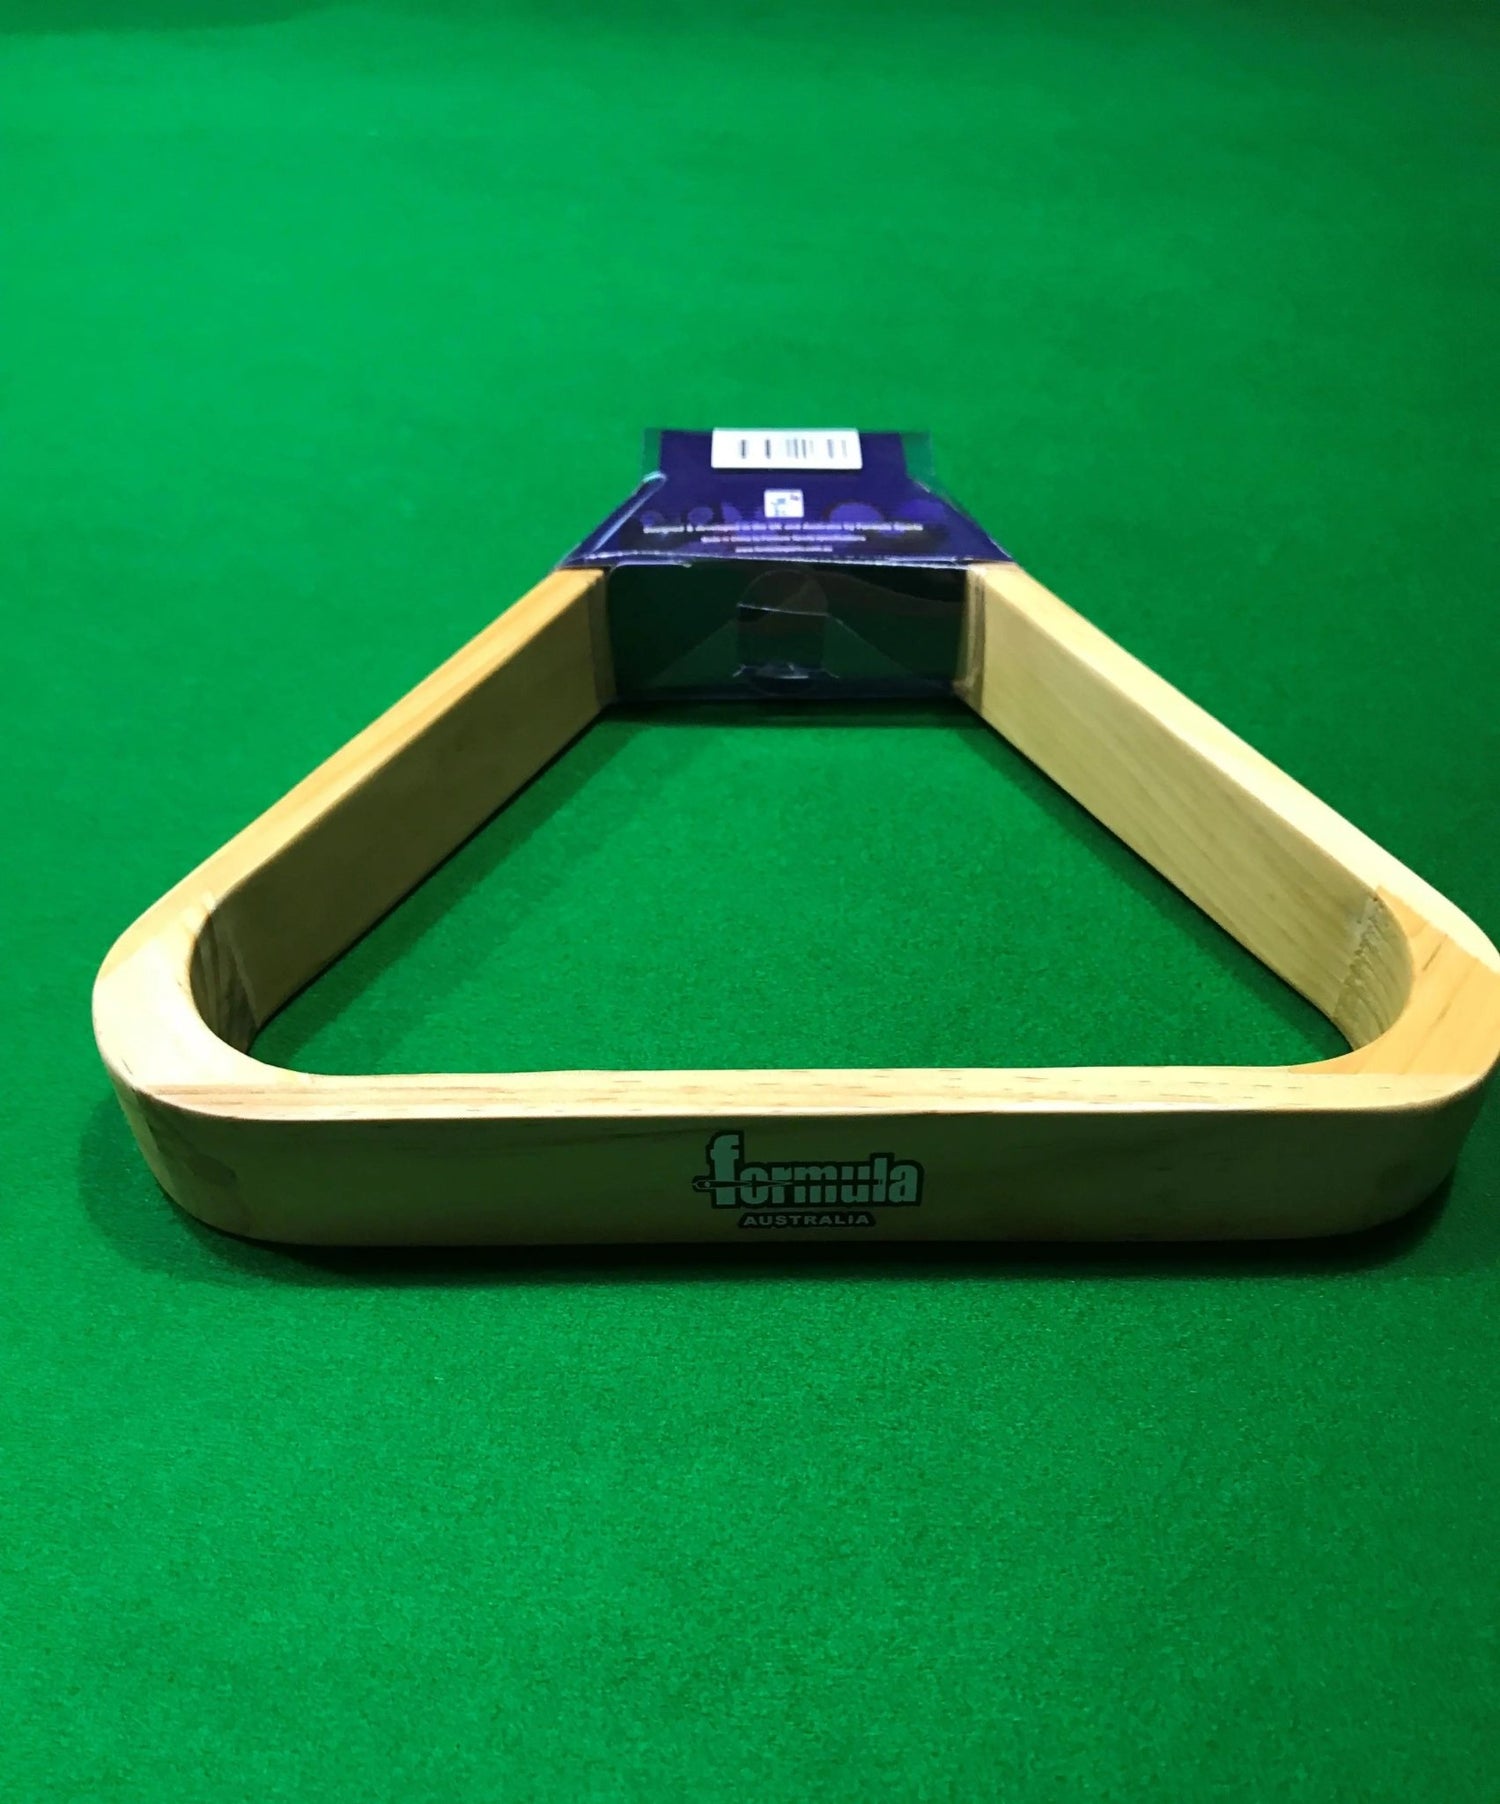 Wood 2" Snooker Triangle - Q-Masters